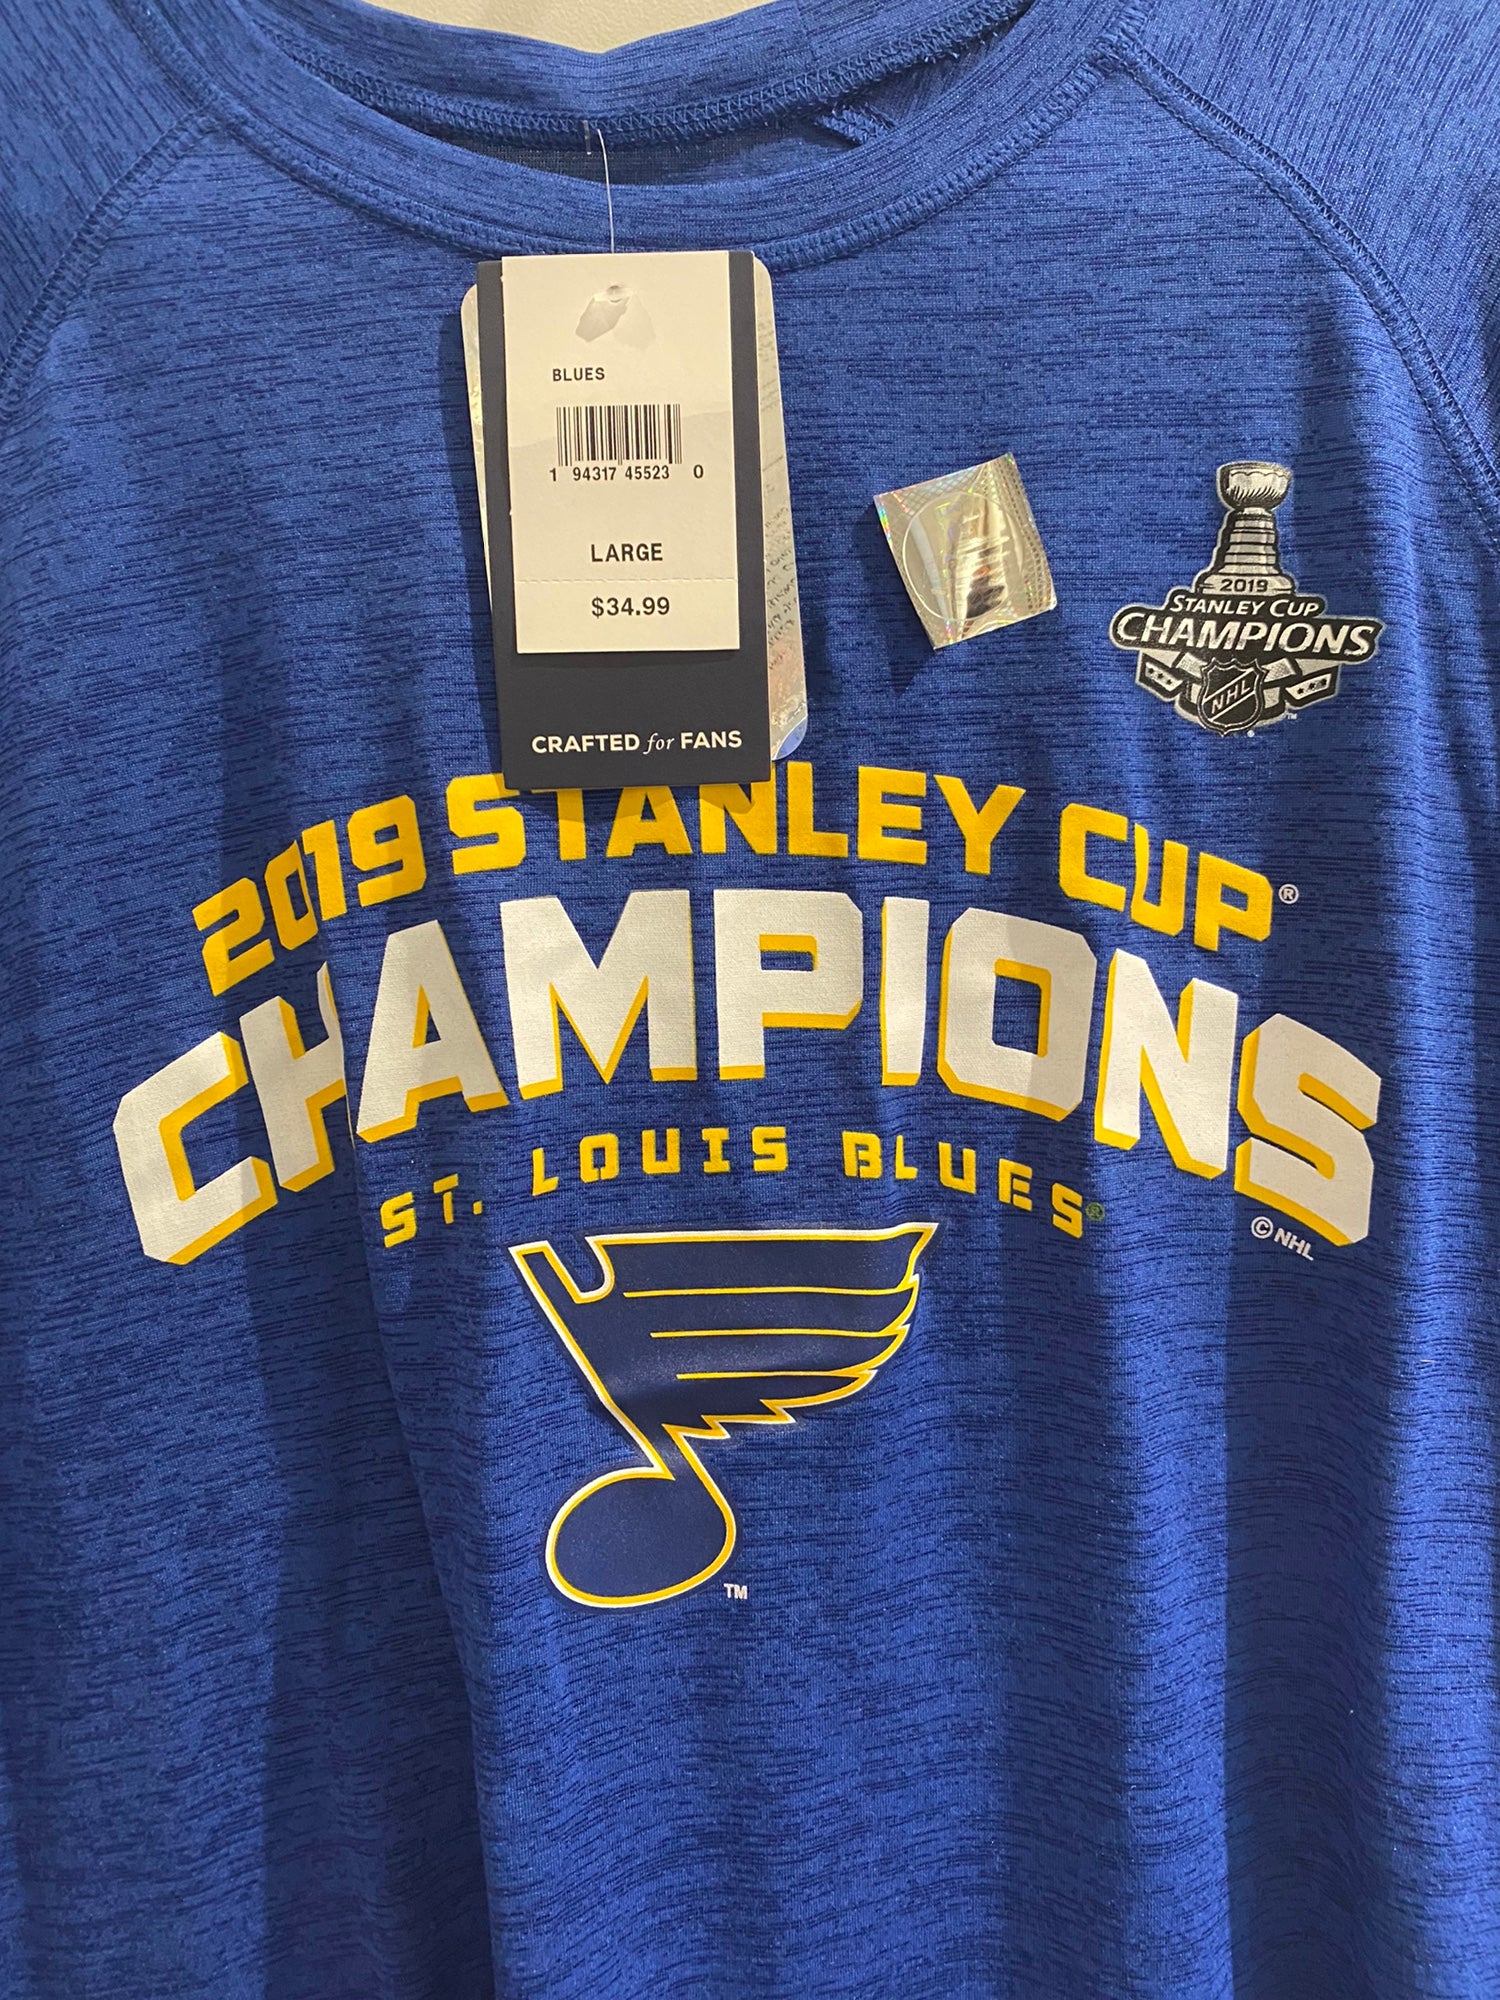 St. Louis Blues: 2019 Stanley Cup Champions - The Athletic